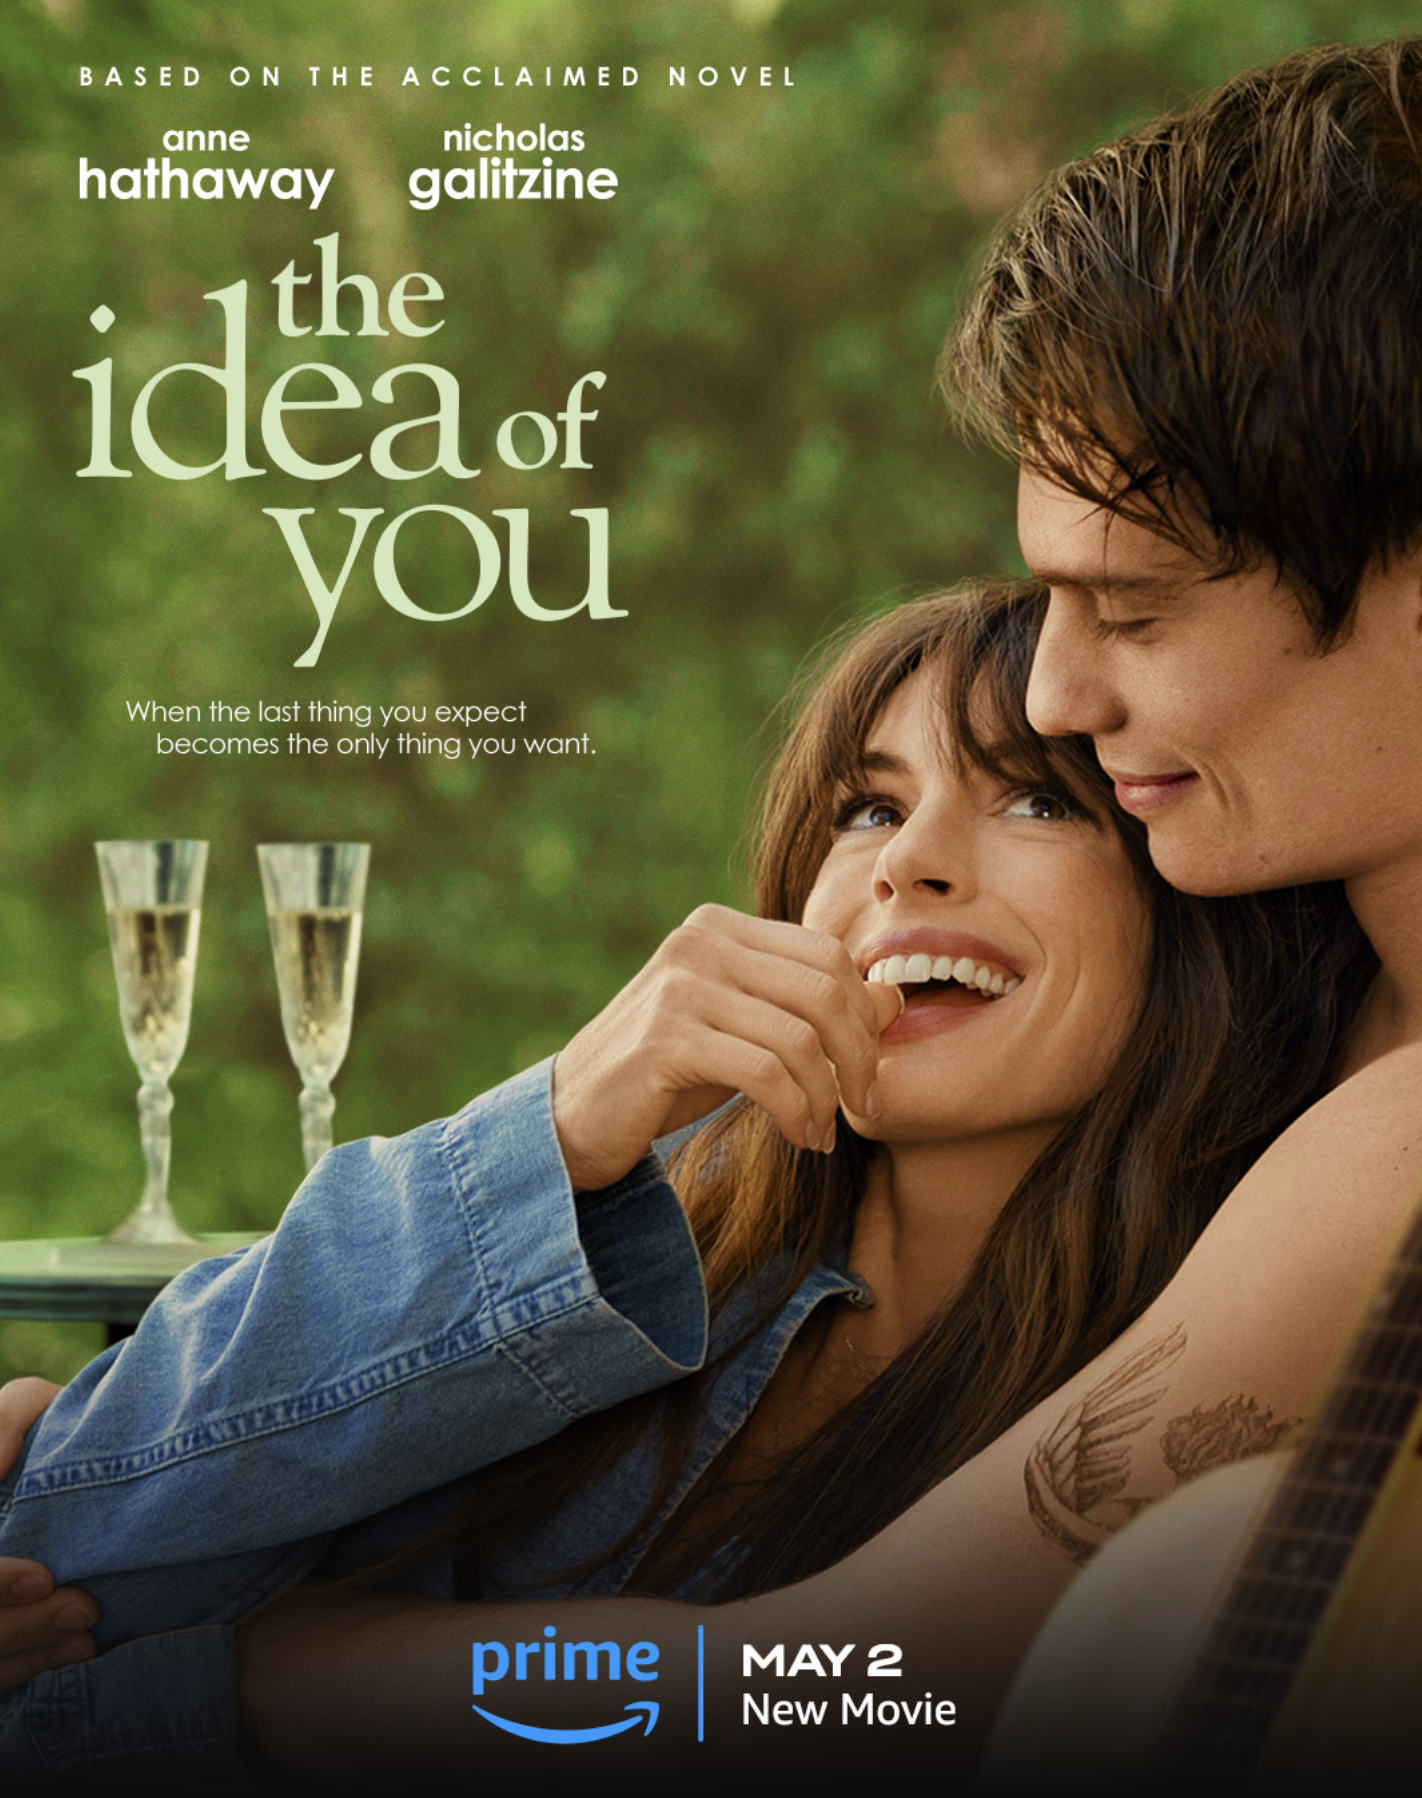 You are currently viewing ‘The Idea of You’ Spotlights Anne Hathaway, 41, in a Cougar Relationship with Nicholas Galitzine, 29